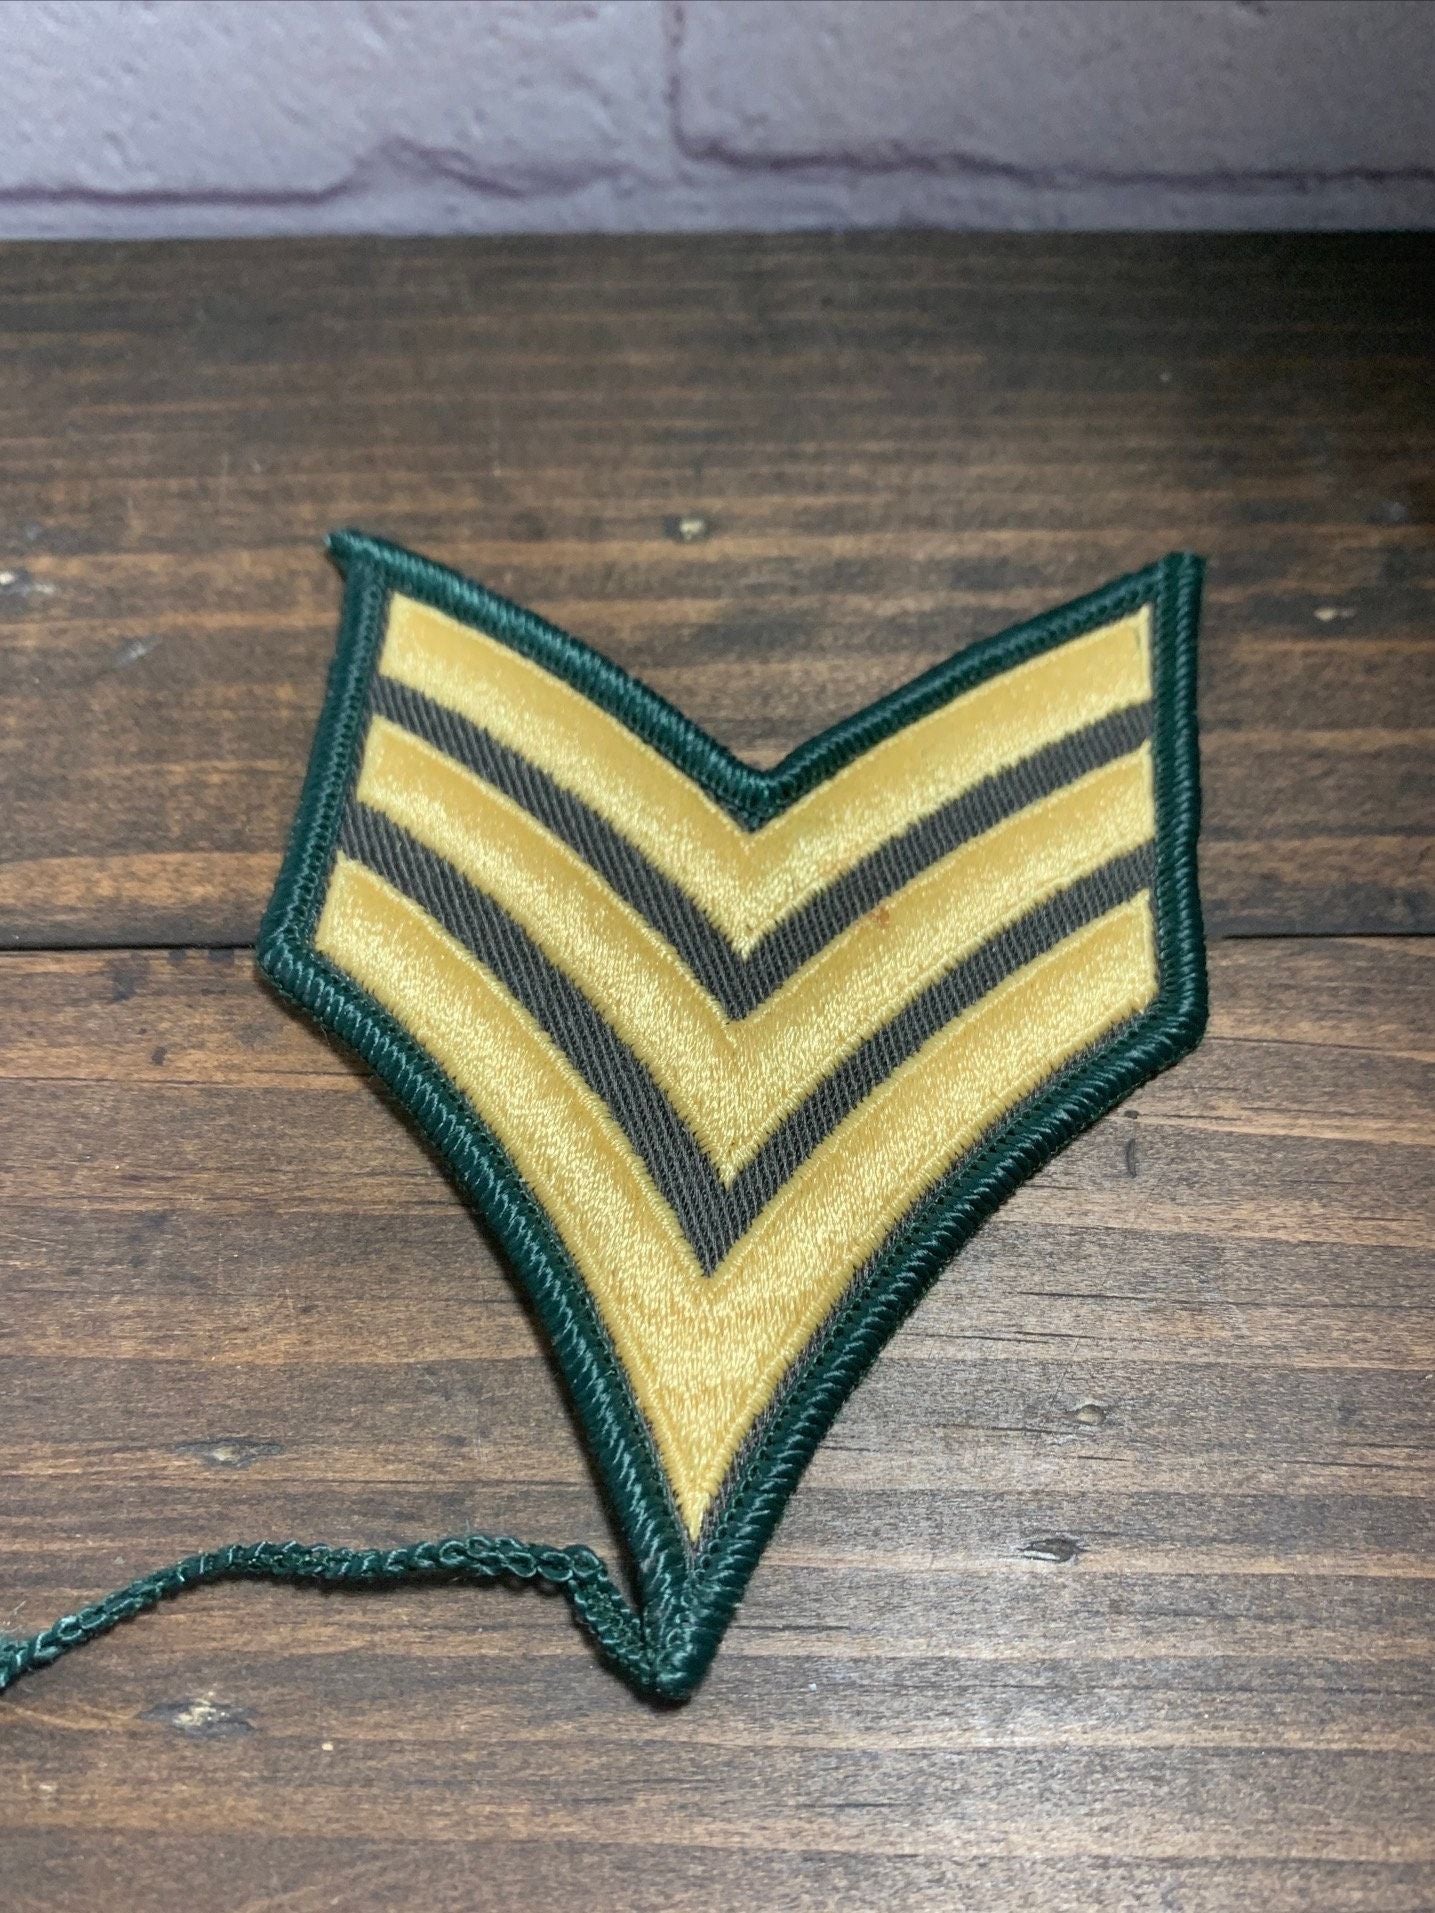 Vintage US Army Sergeant Military Rank Gold Stripes Patch